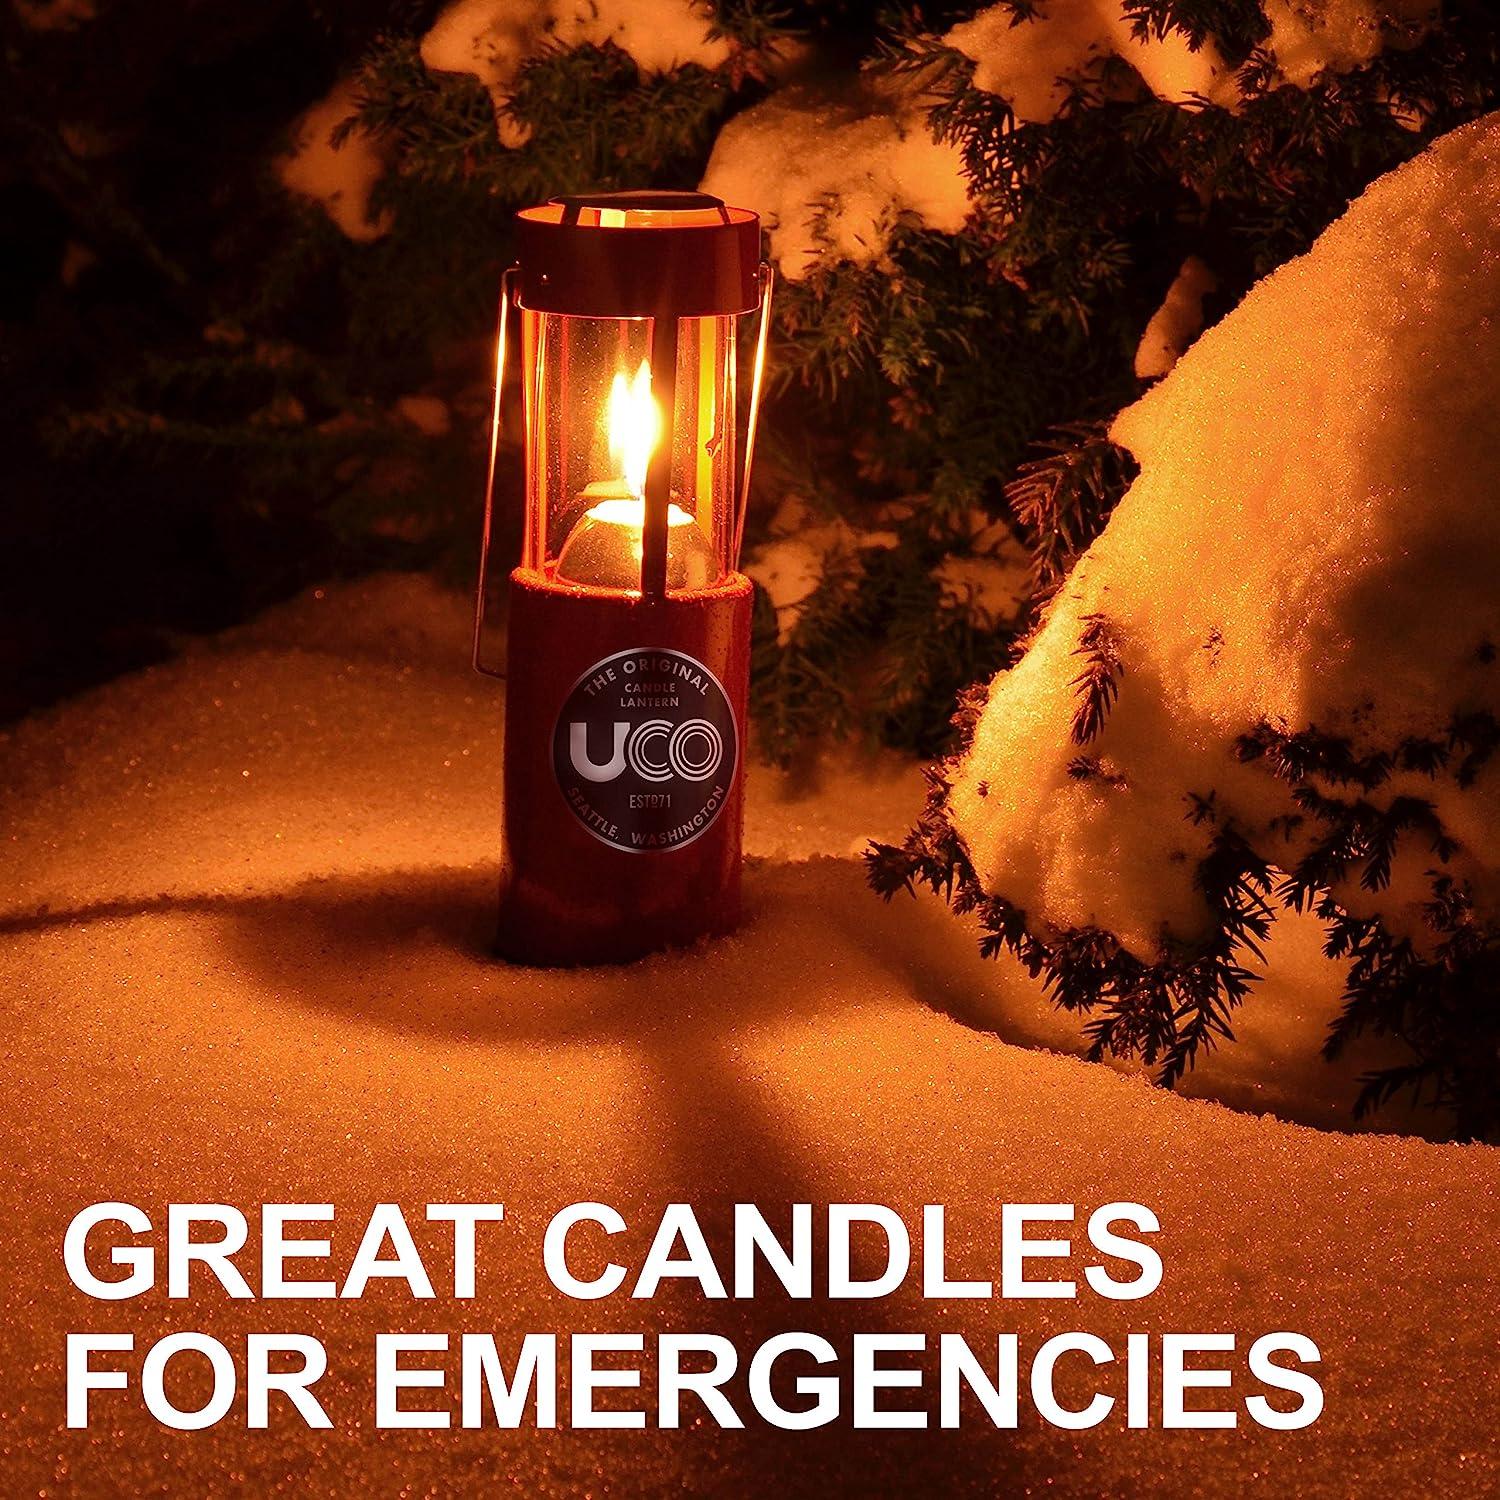 UCO 9-Hour White Candles for UCO Candle Lanterns and Emergency Preparedness  Emergency Candles 20-Pack